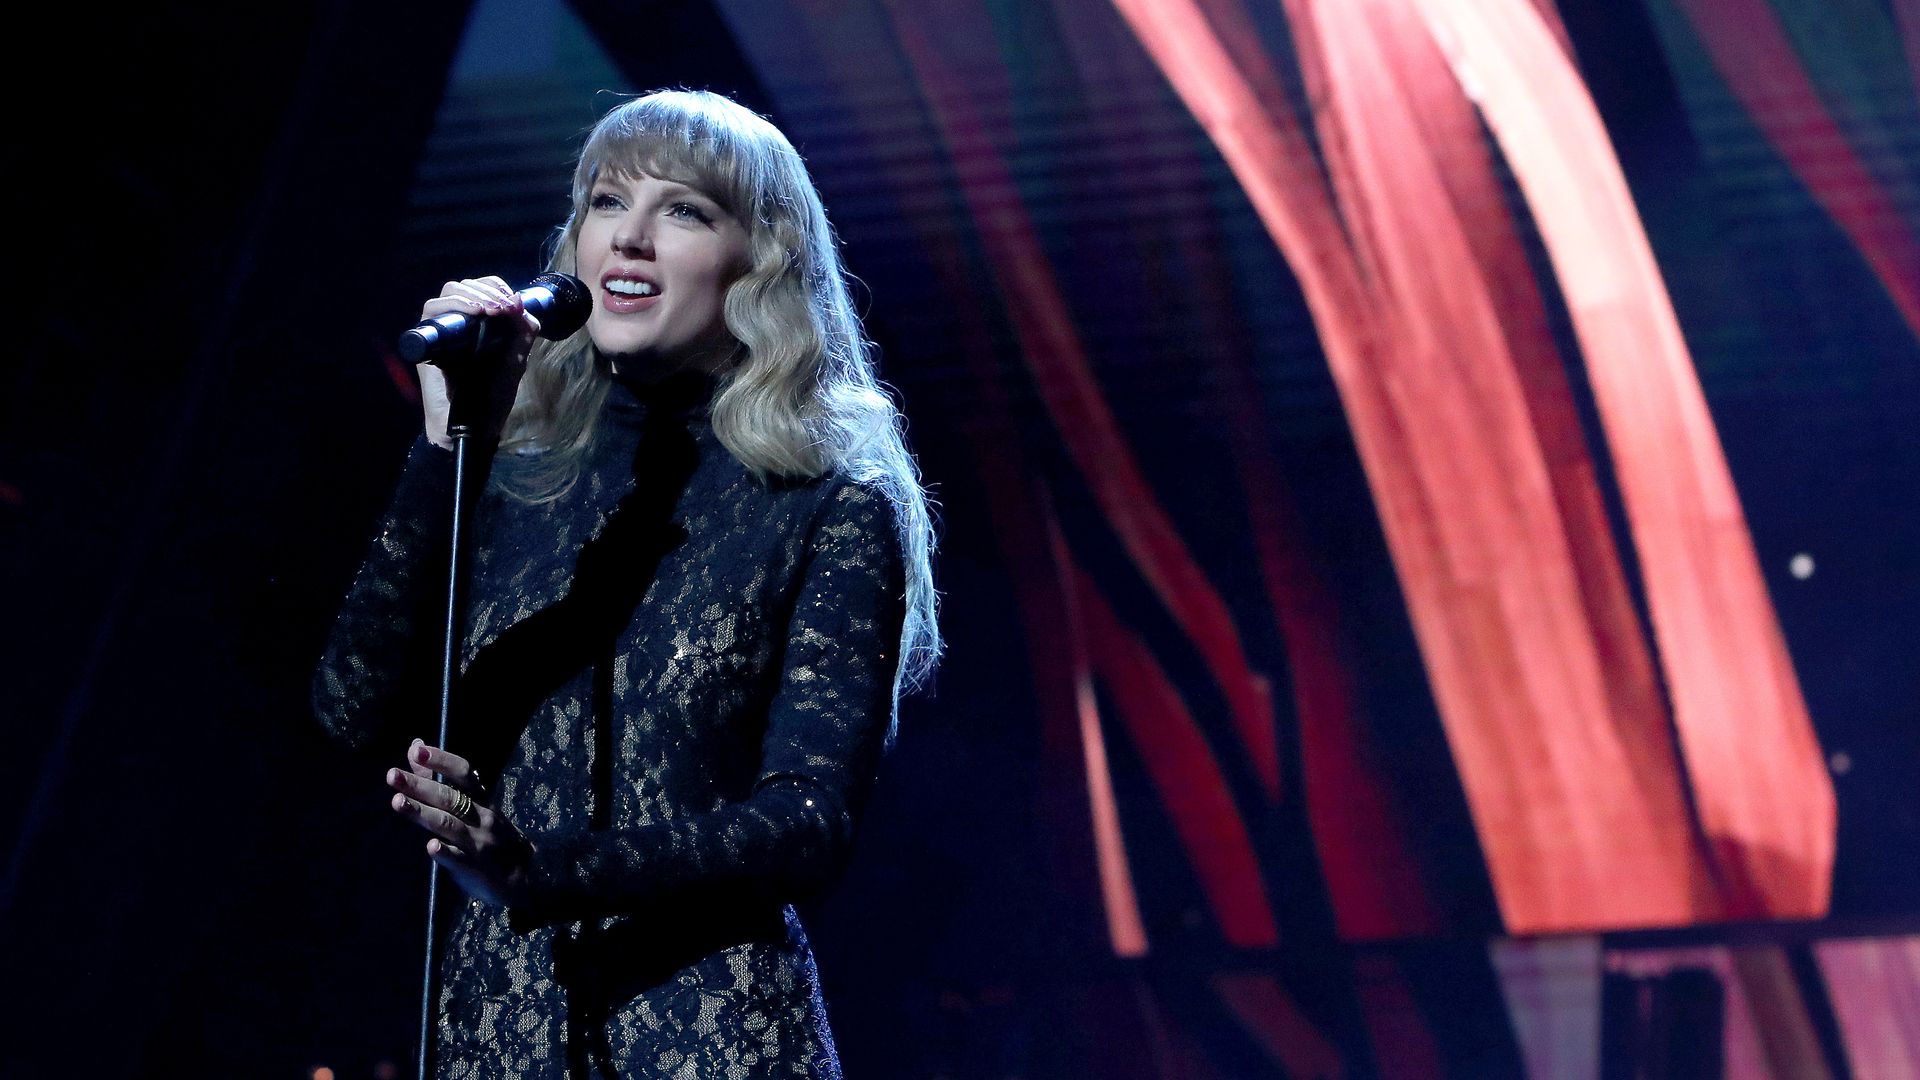 Taylor Swift sings at a microphone stand in a black body suit